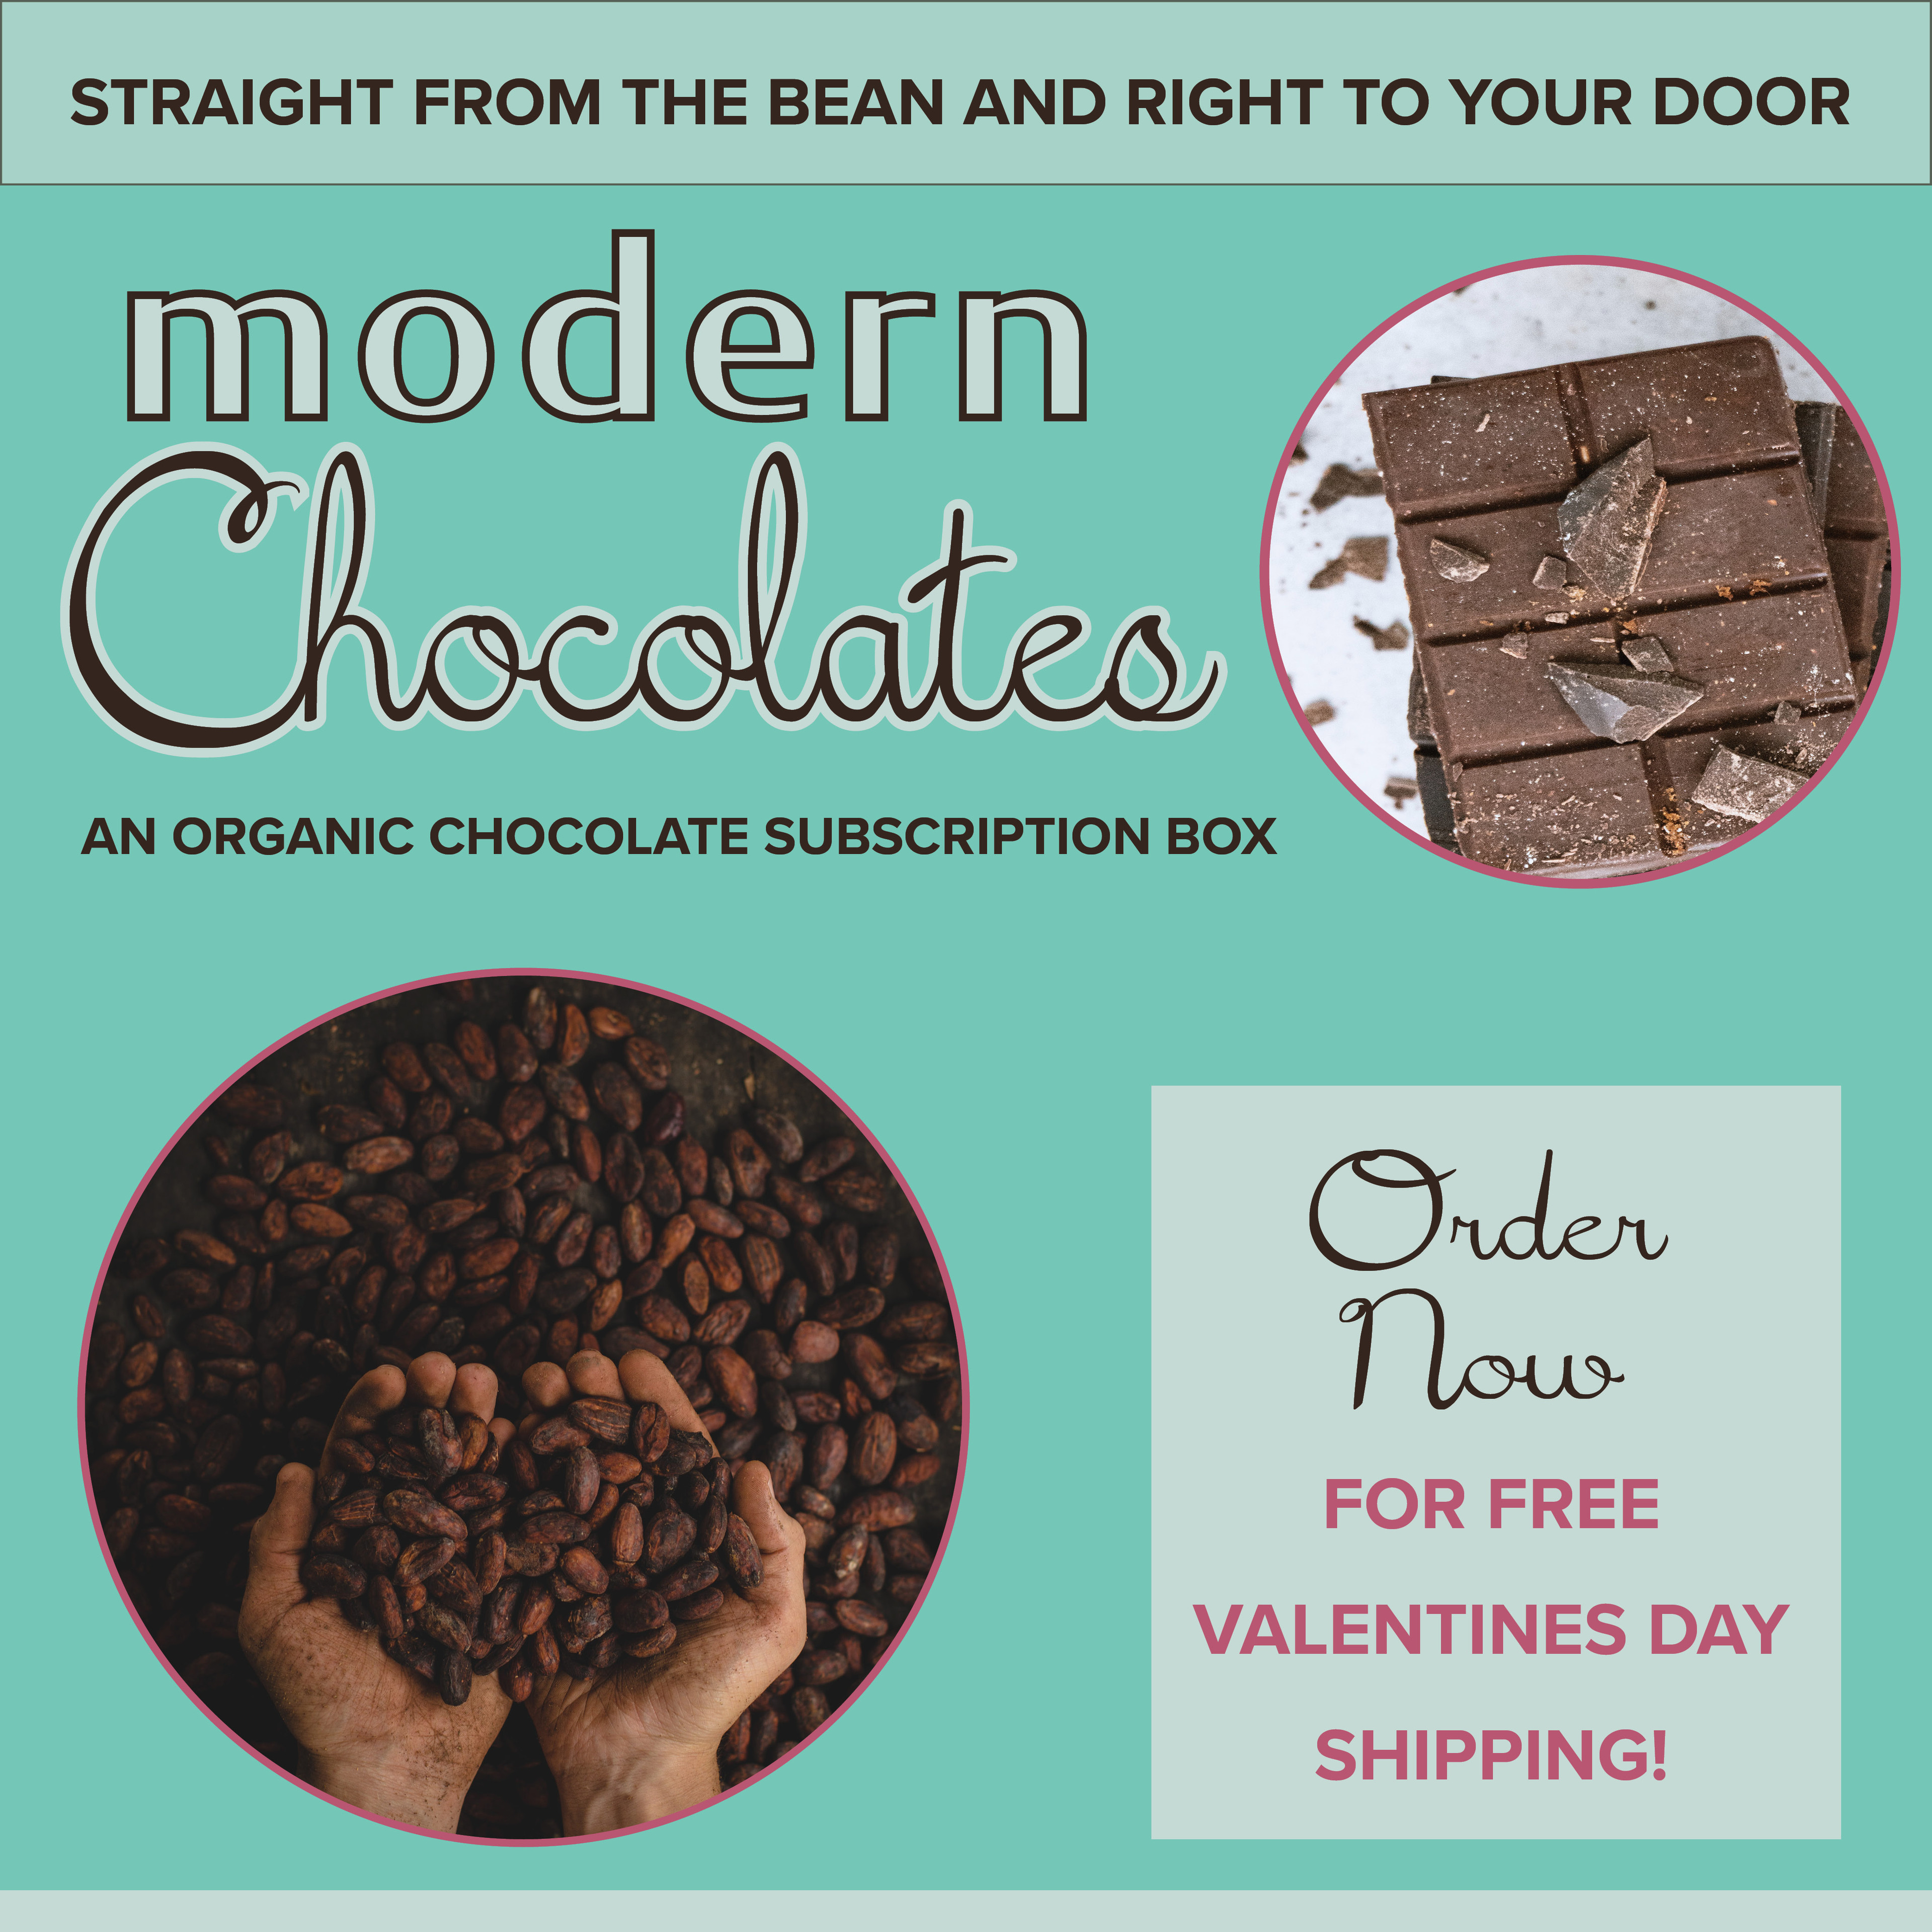 The second ad post for Modern Chocolates, this time advertising free shipping for Valentines Day.